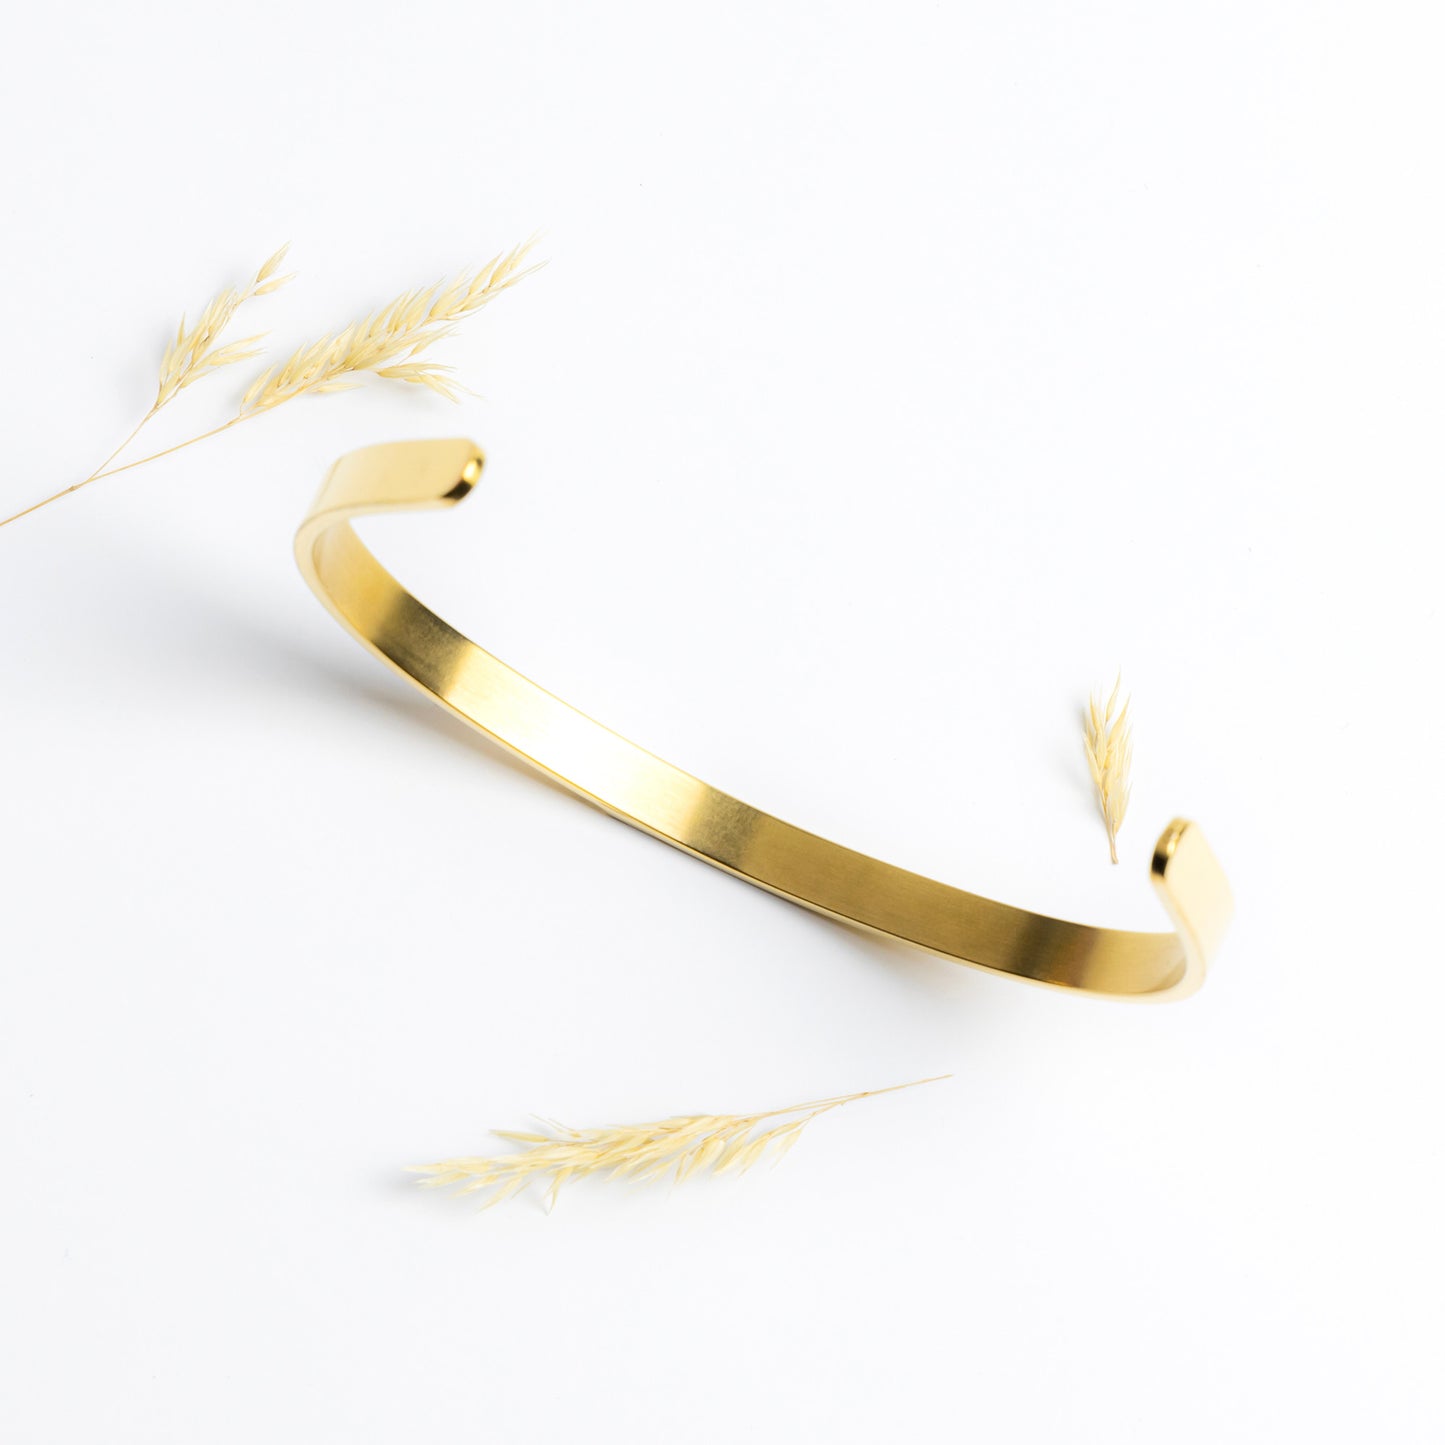 Inspired By Your Light Cuff Bracelet